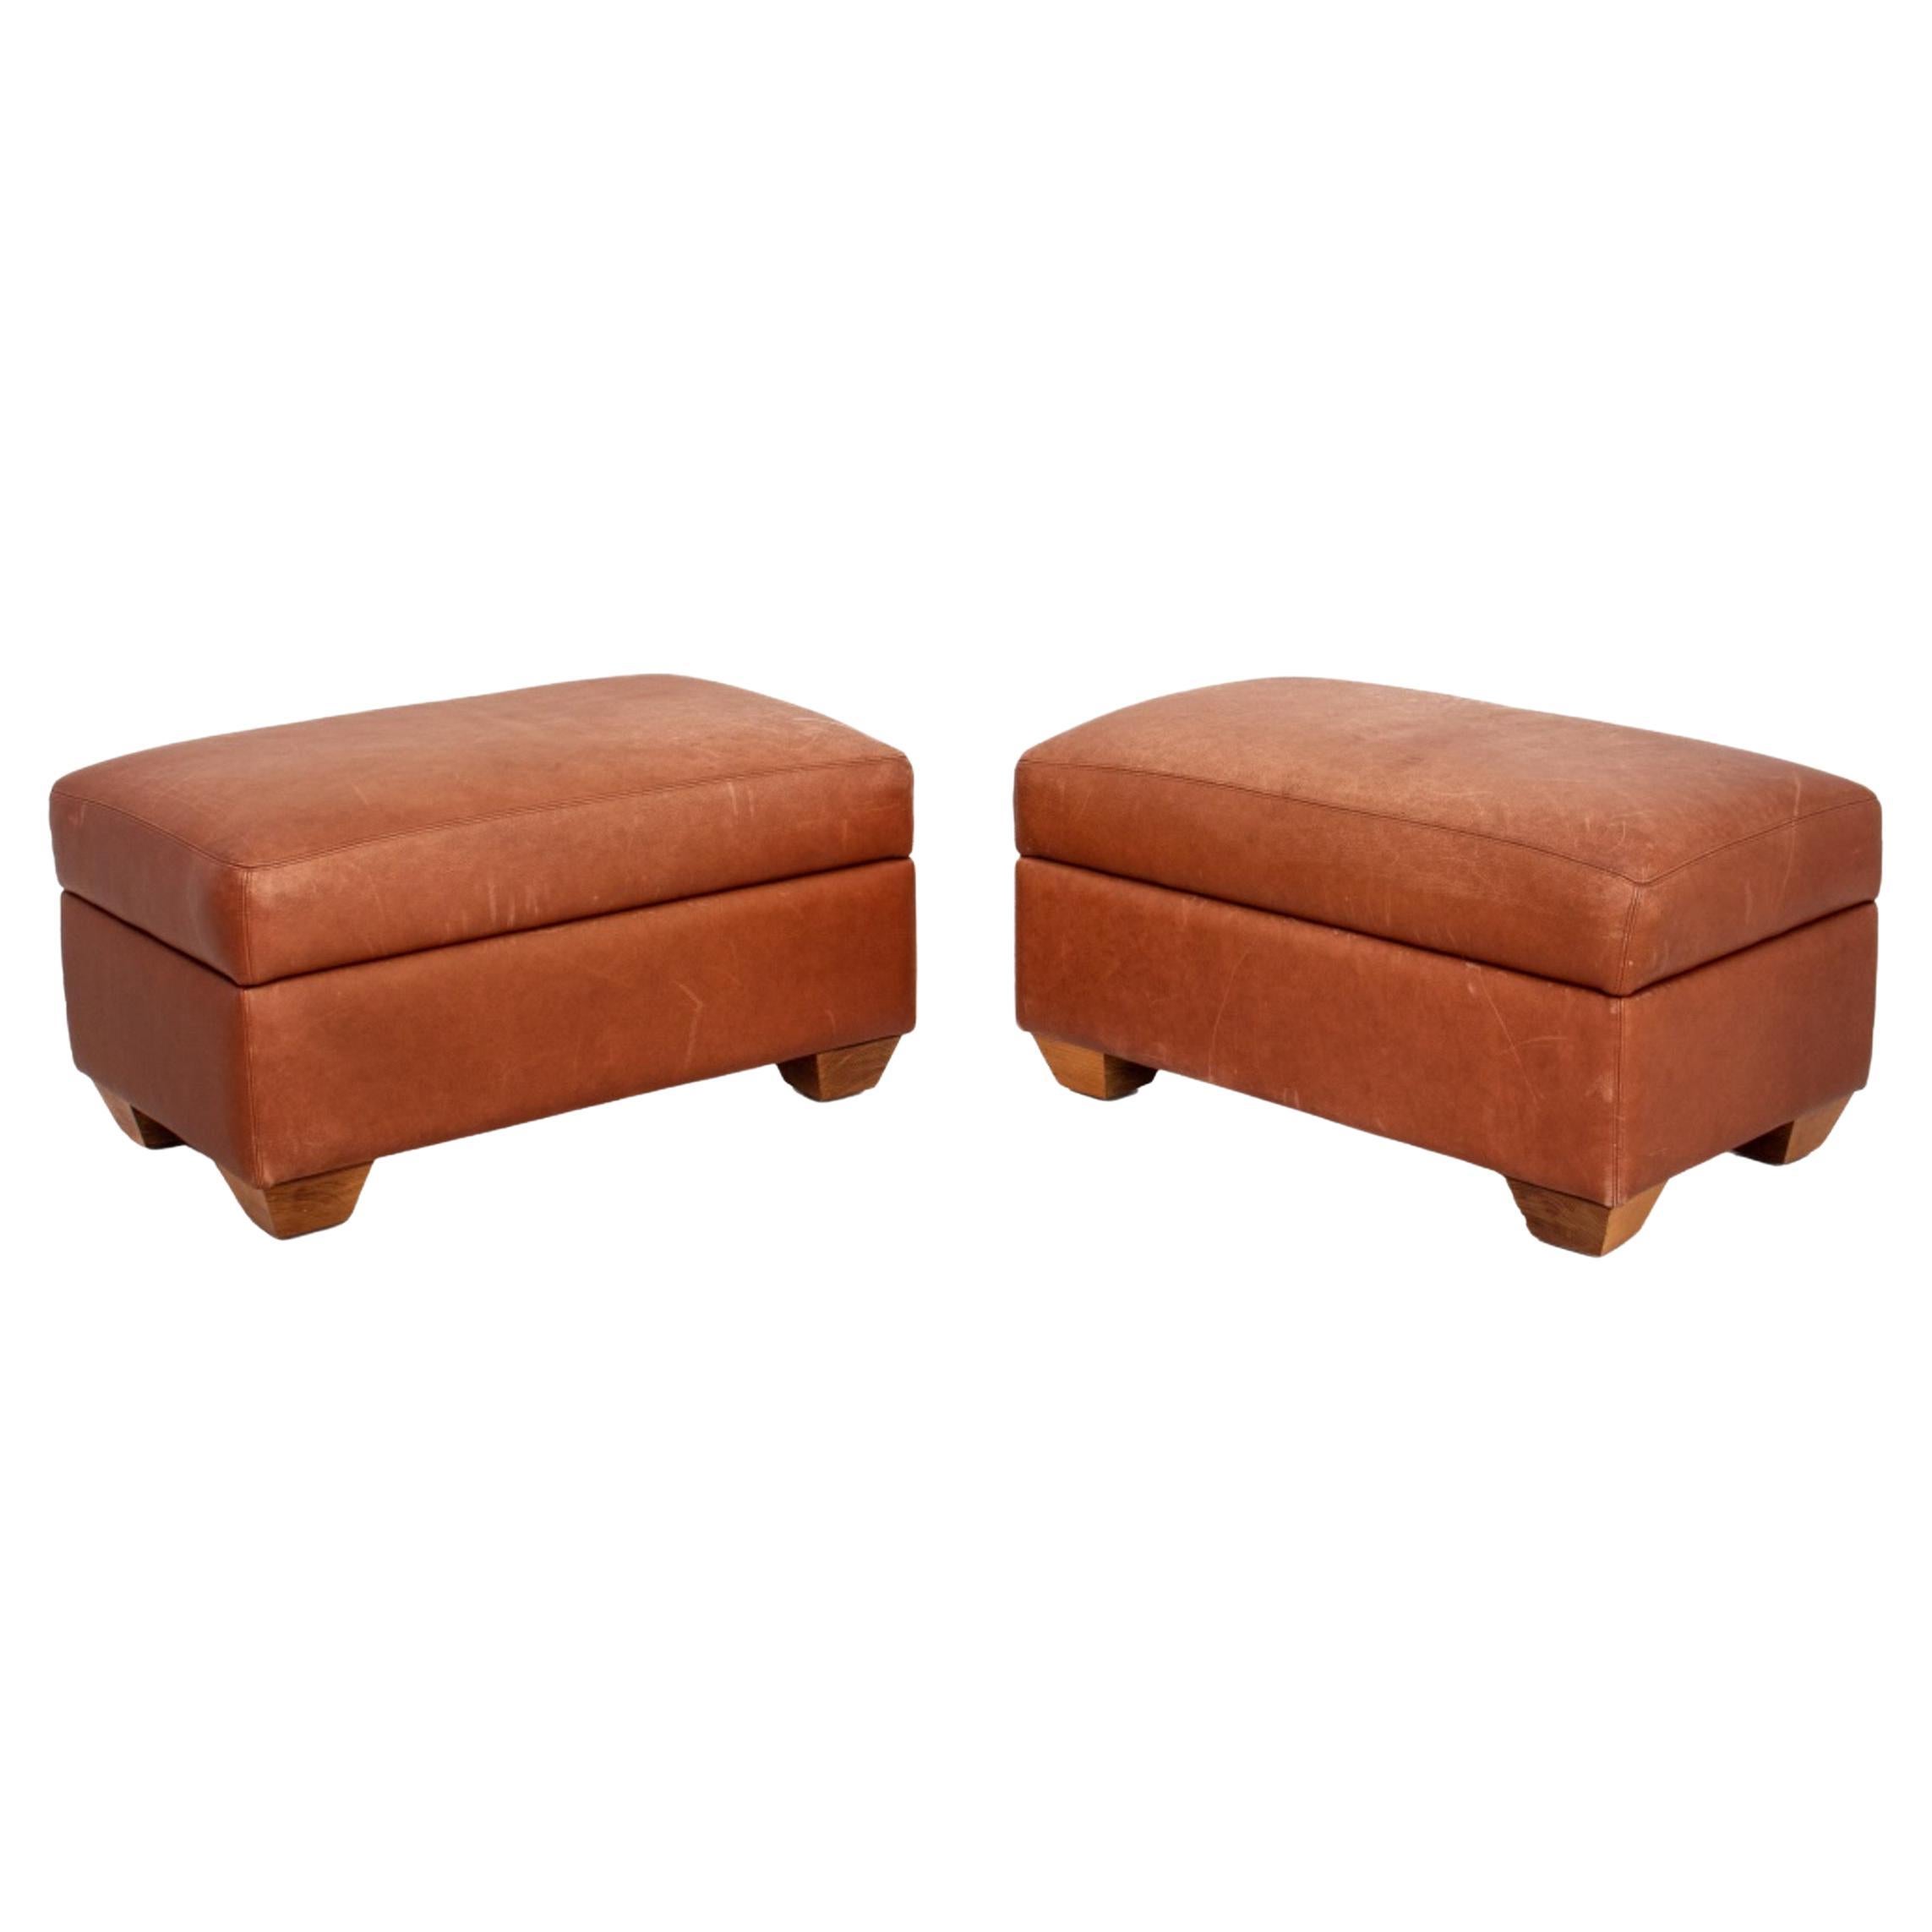 Art Deco Style Leather Ottoman For Sale